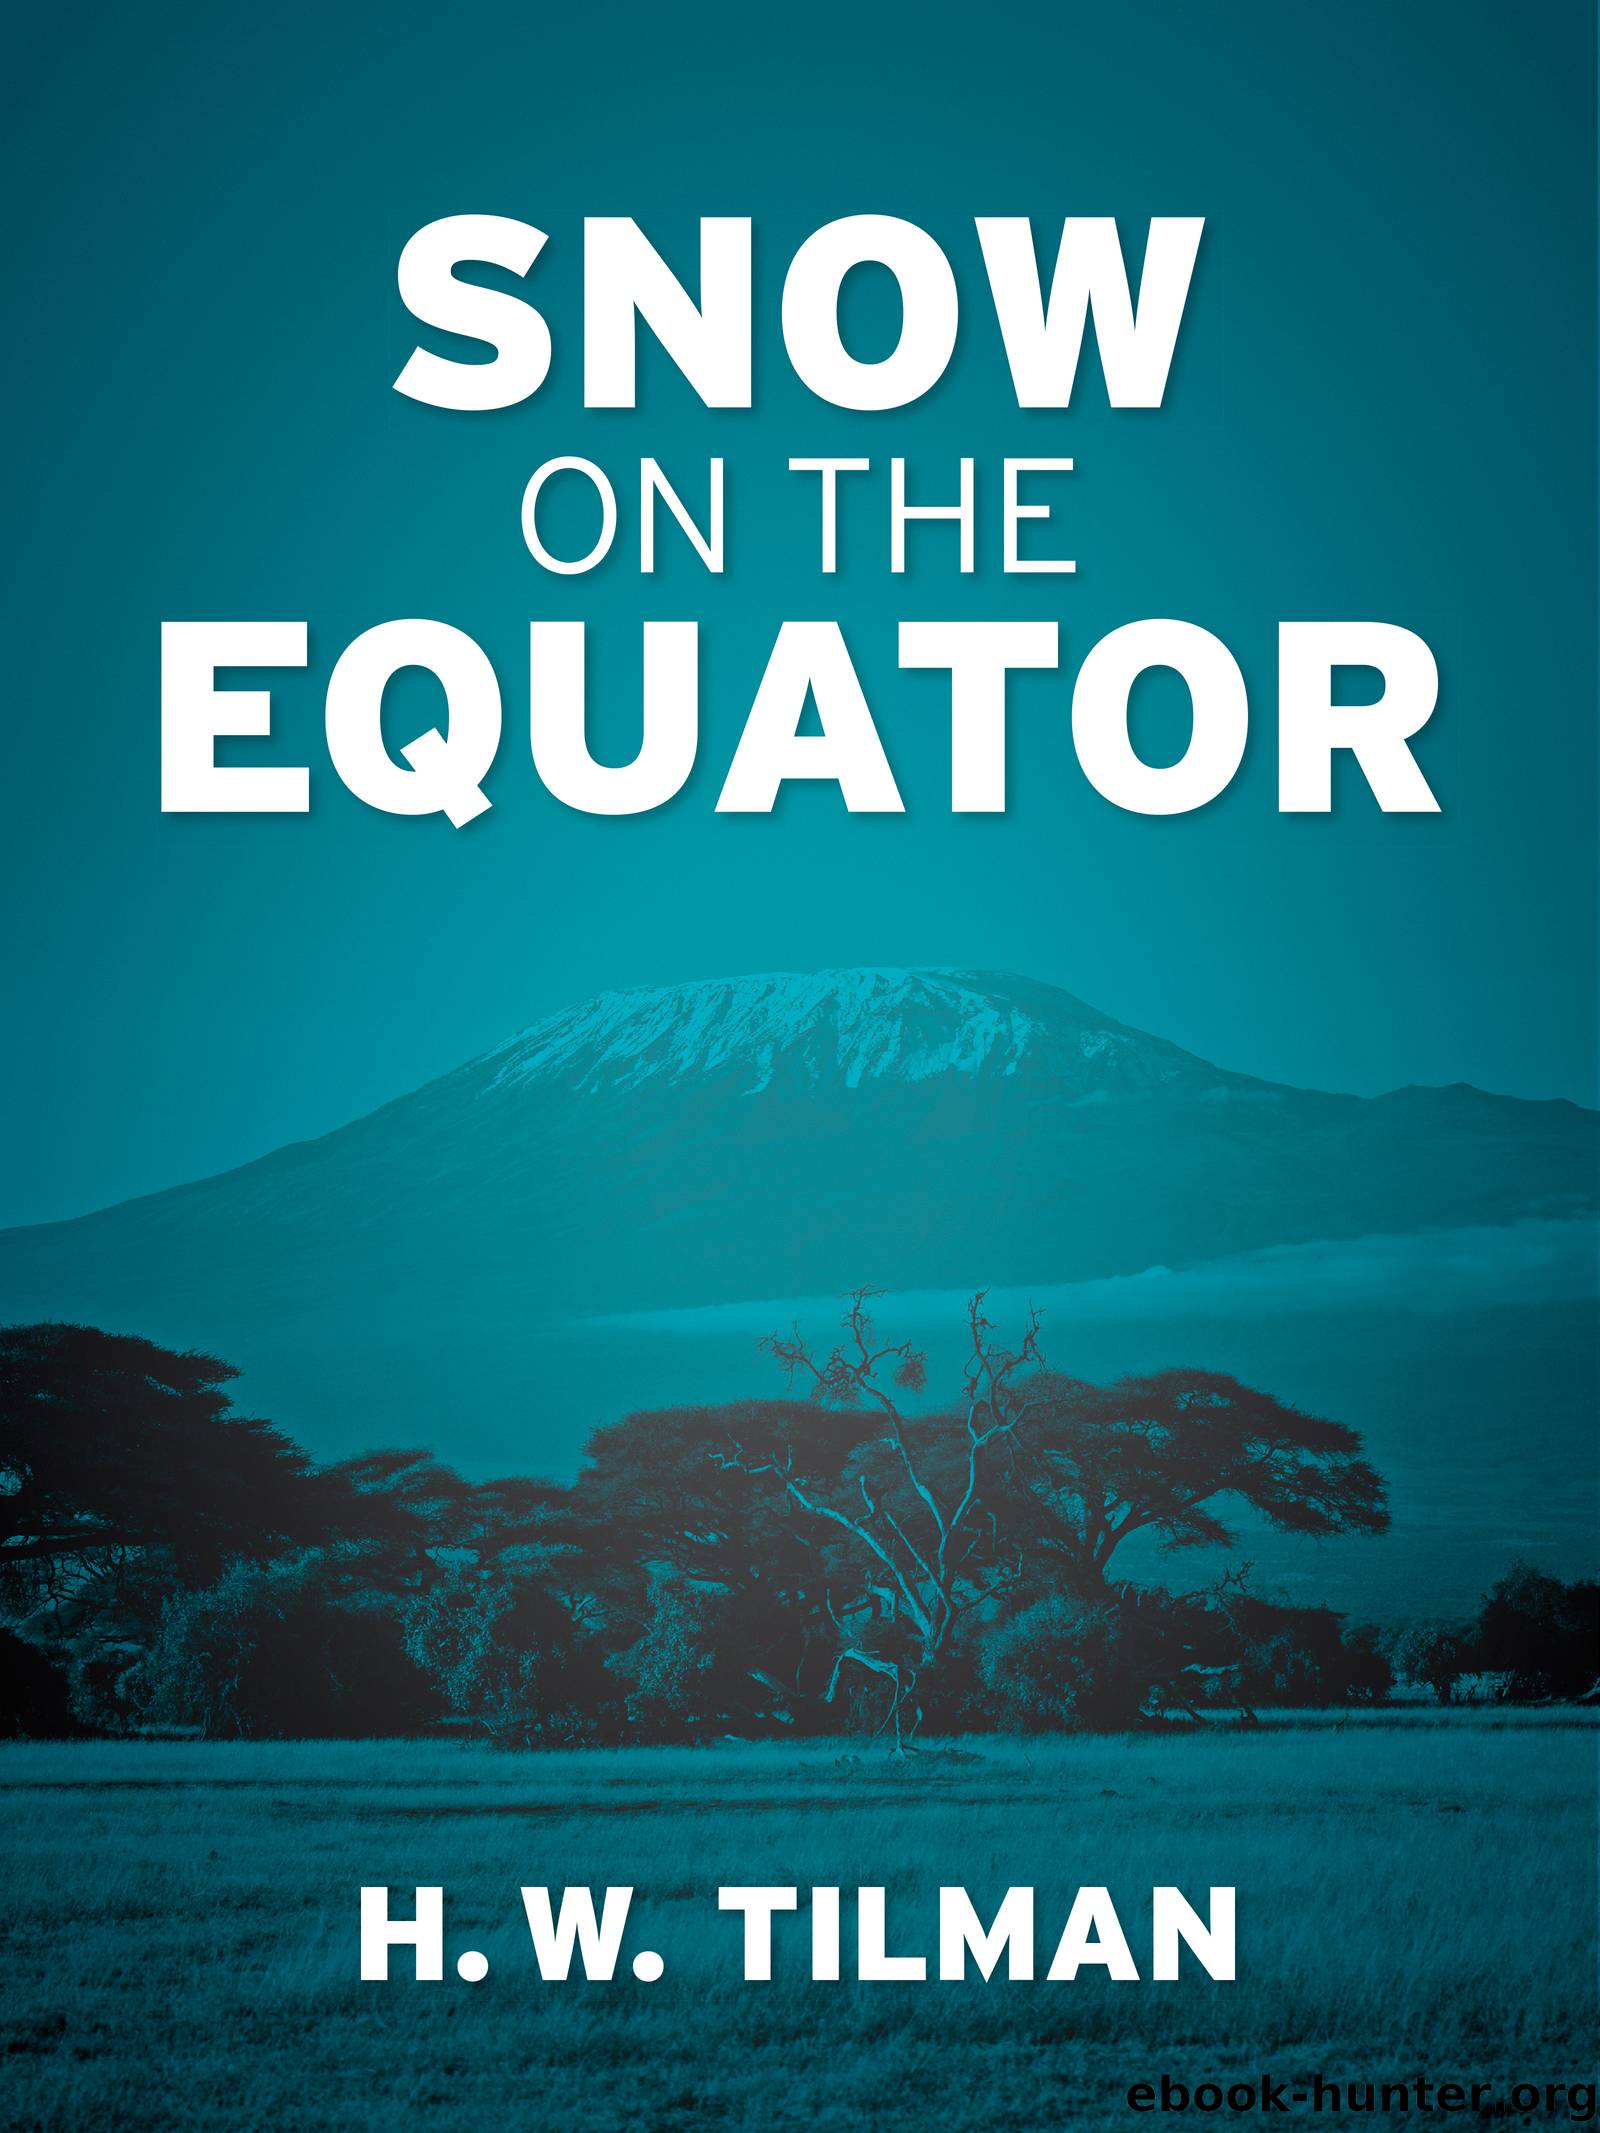 Snow on the Equator by H.W. Tilman